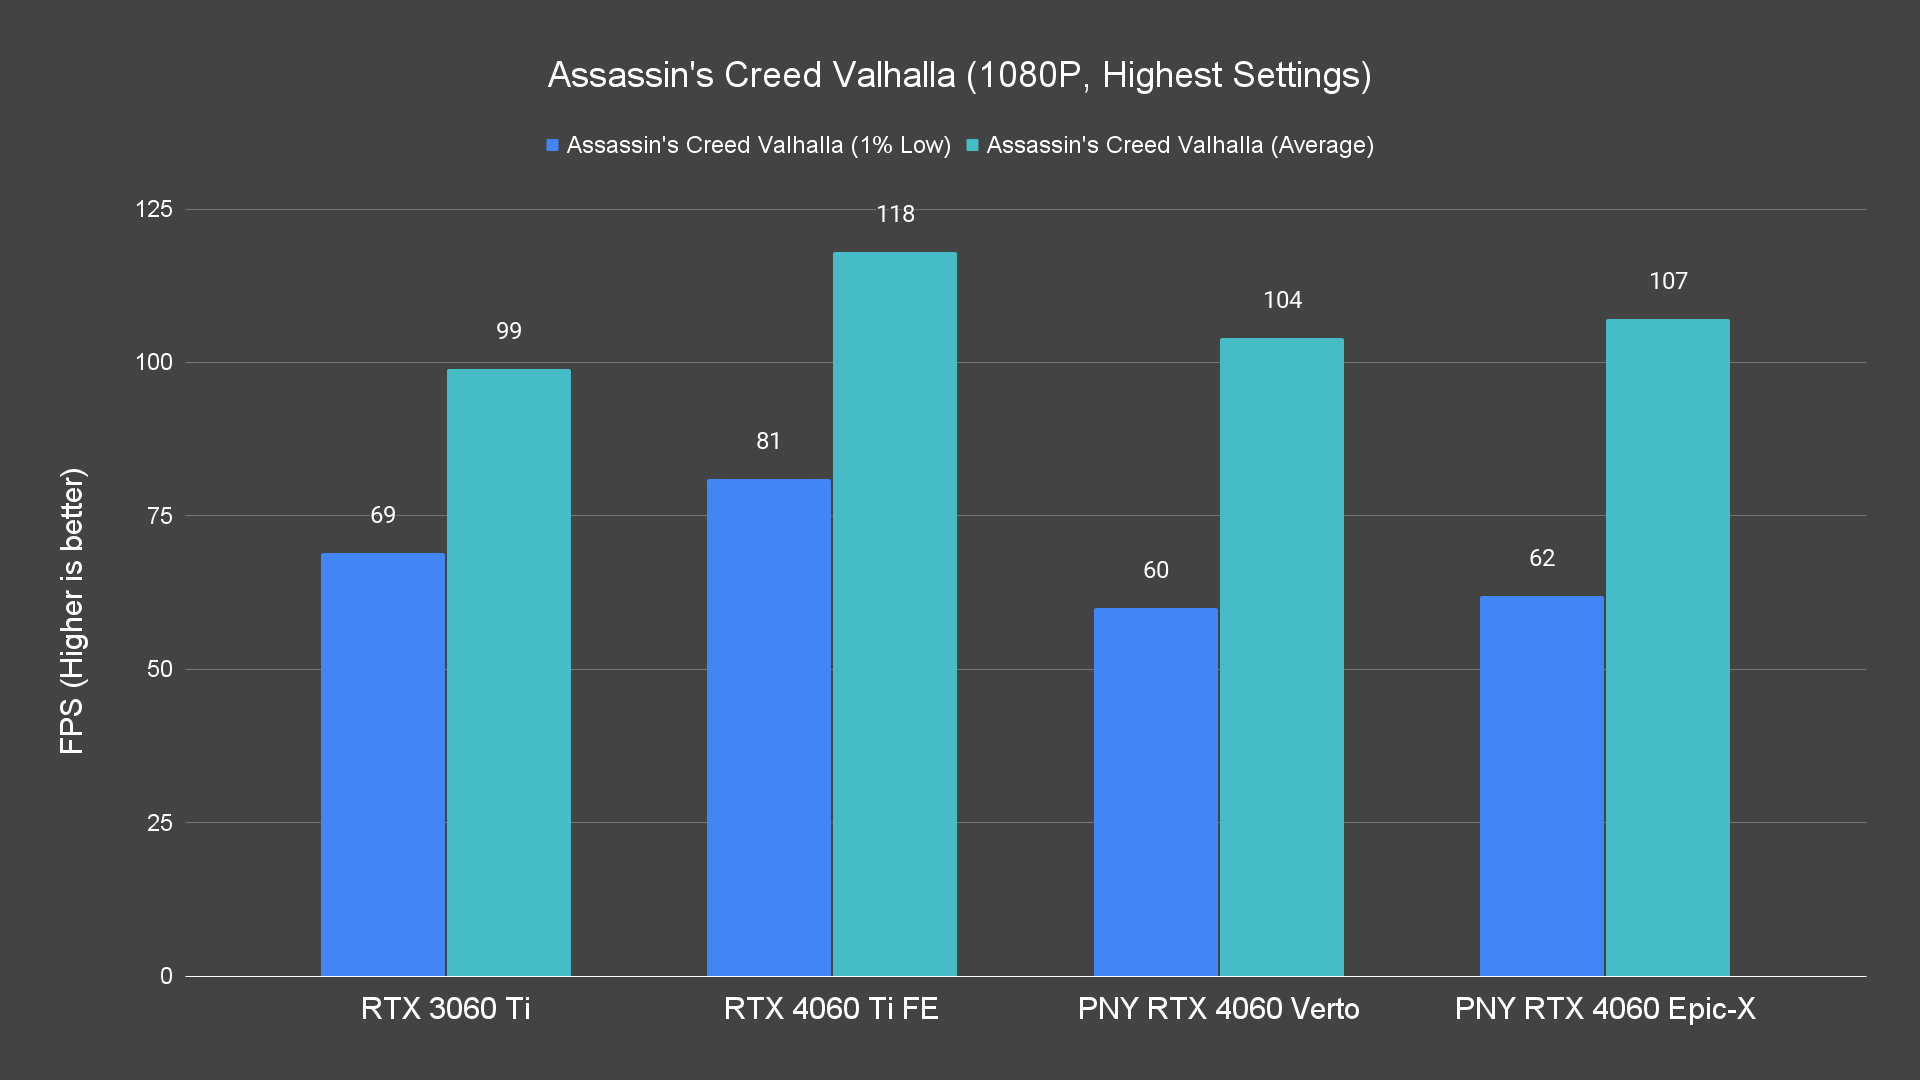 Assassin's Creed Valhalla (1080P, Highest Settings)